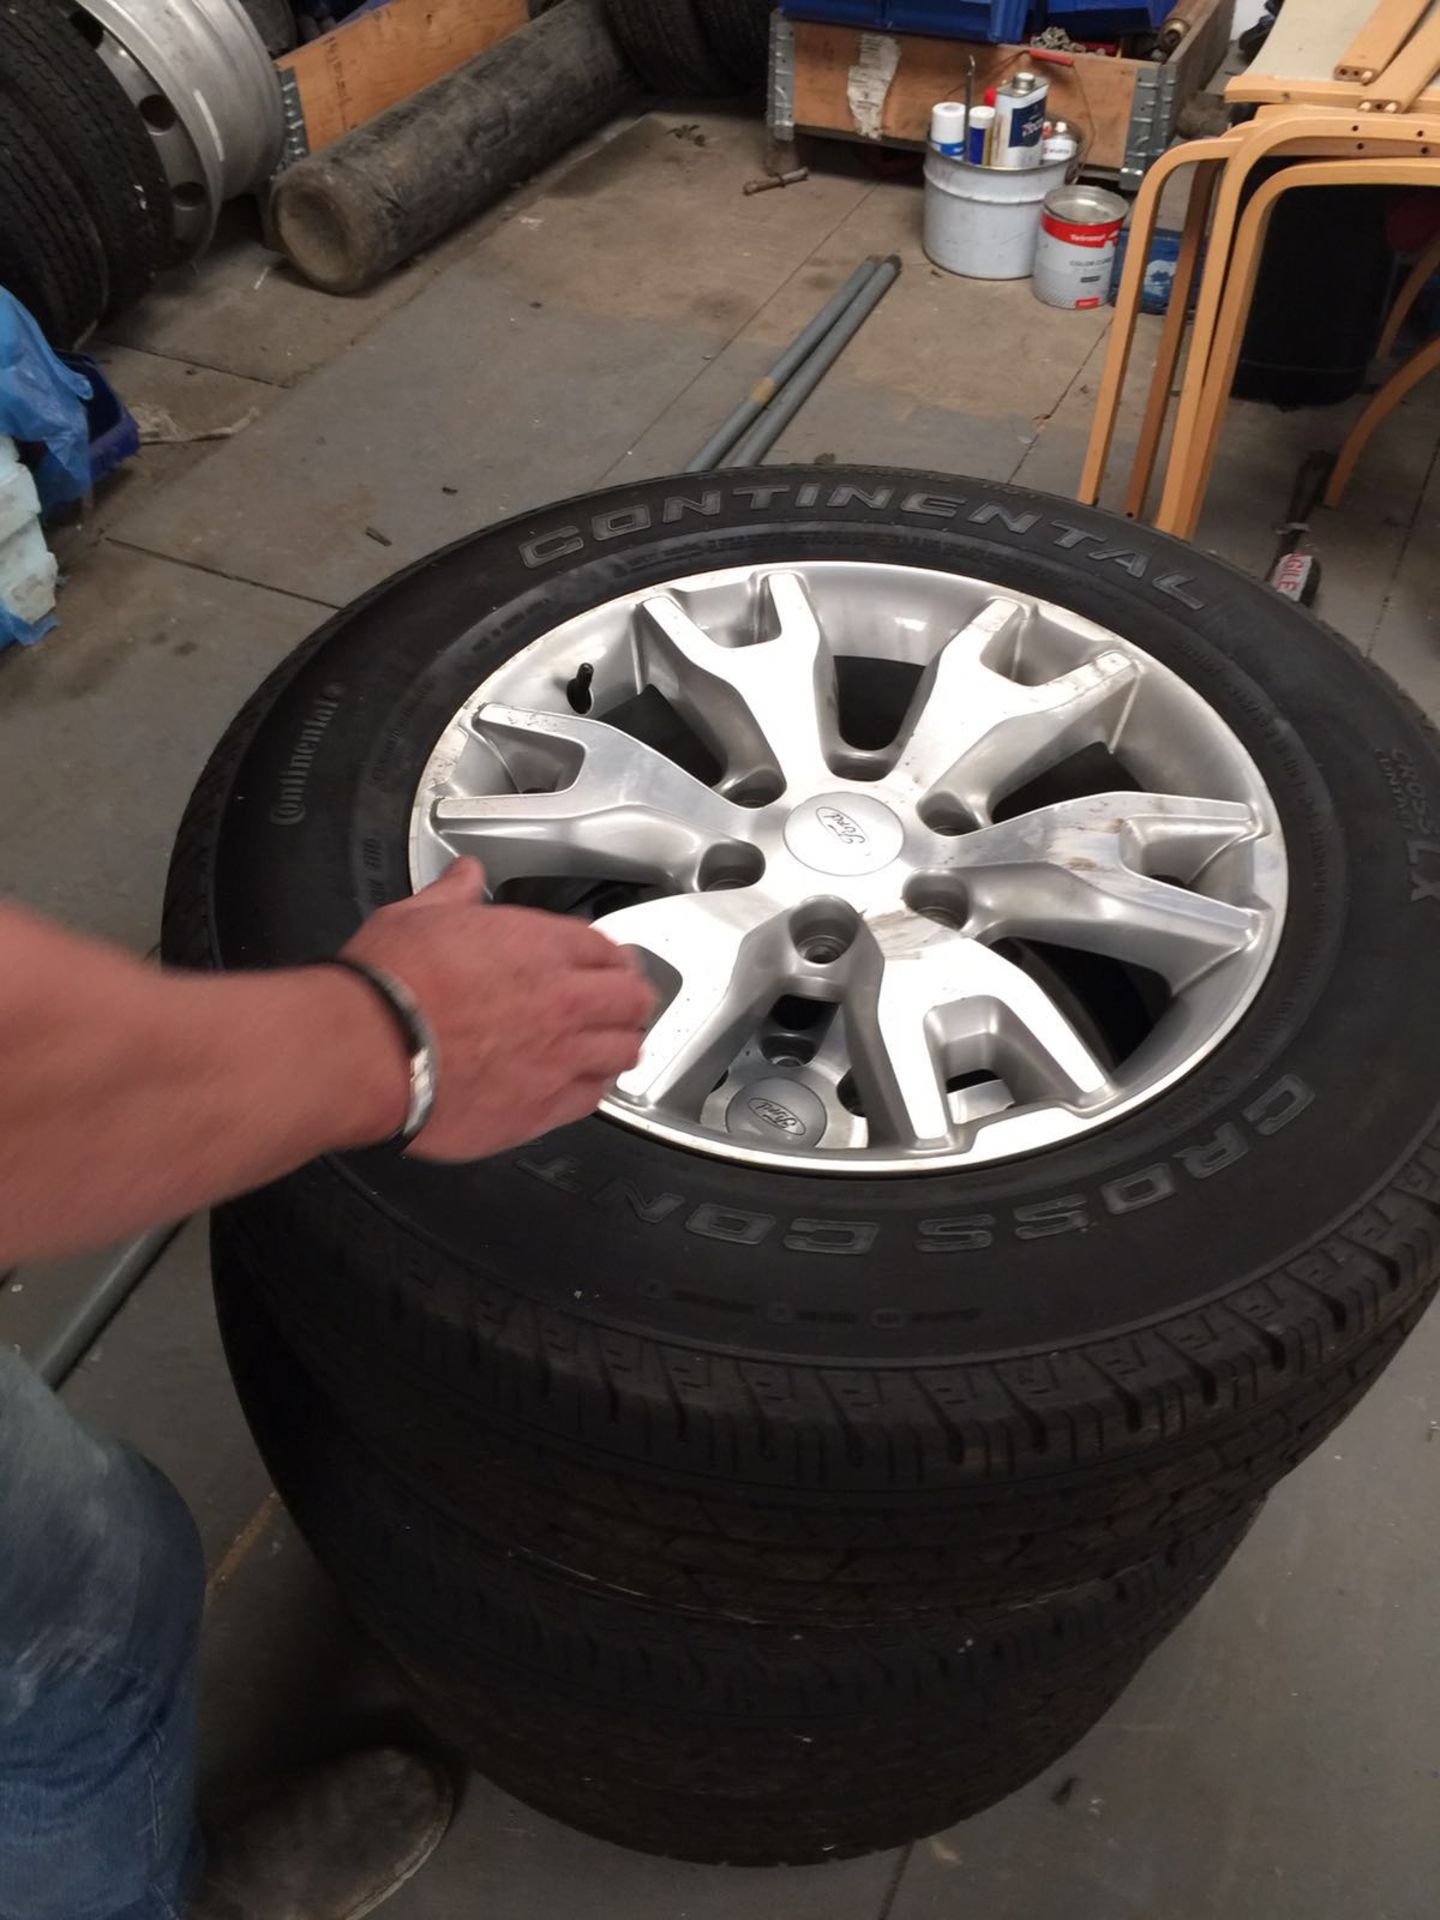 SET OF 4 2016 18" FORD RANGER ALLOY WHEELS WITH CONTINENTAL CROSS CONTACT TYRES ONLY 100 MILES - Image 4 of 5